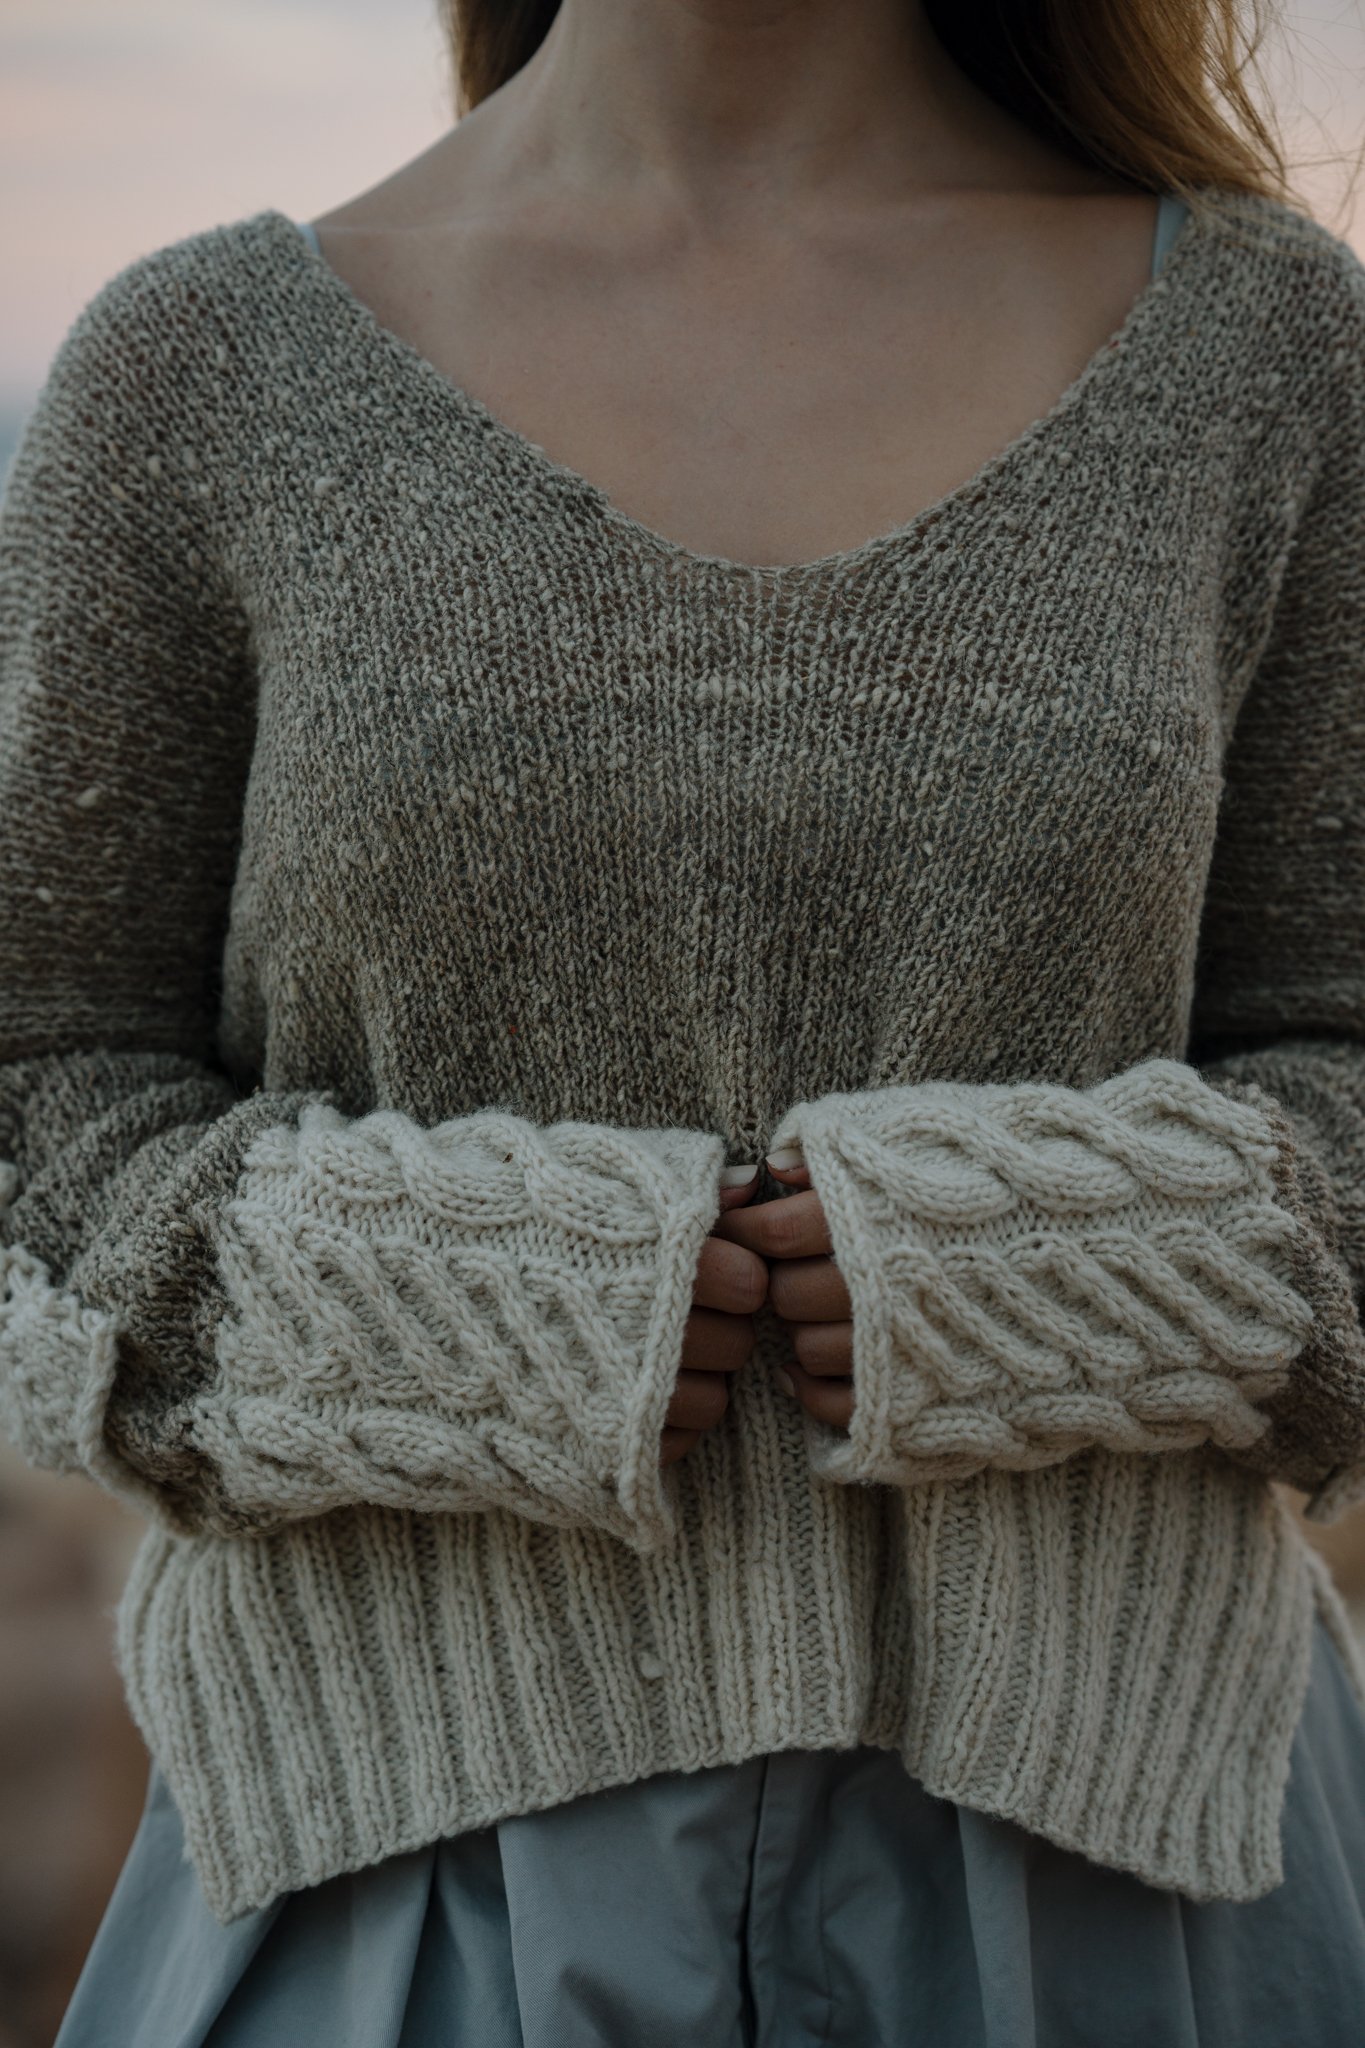 Cable sweater knitting pattern — for the love of knitwear